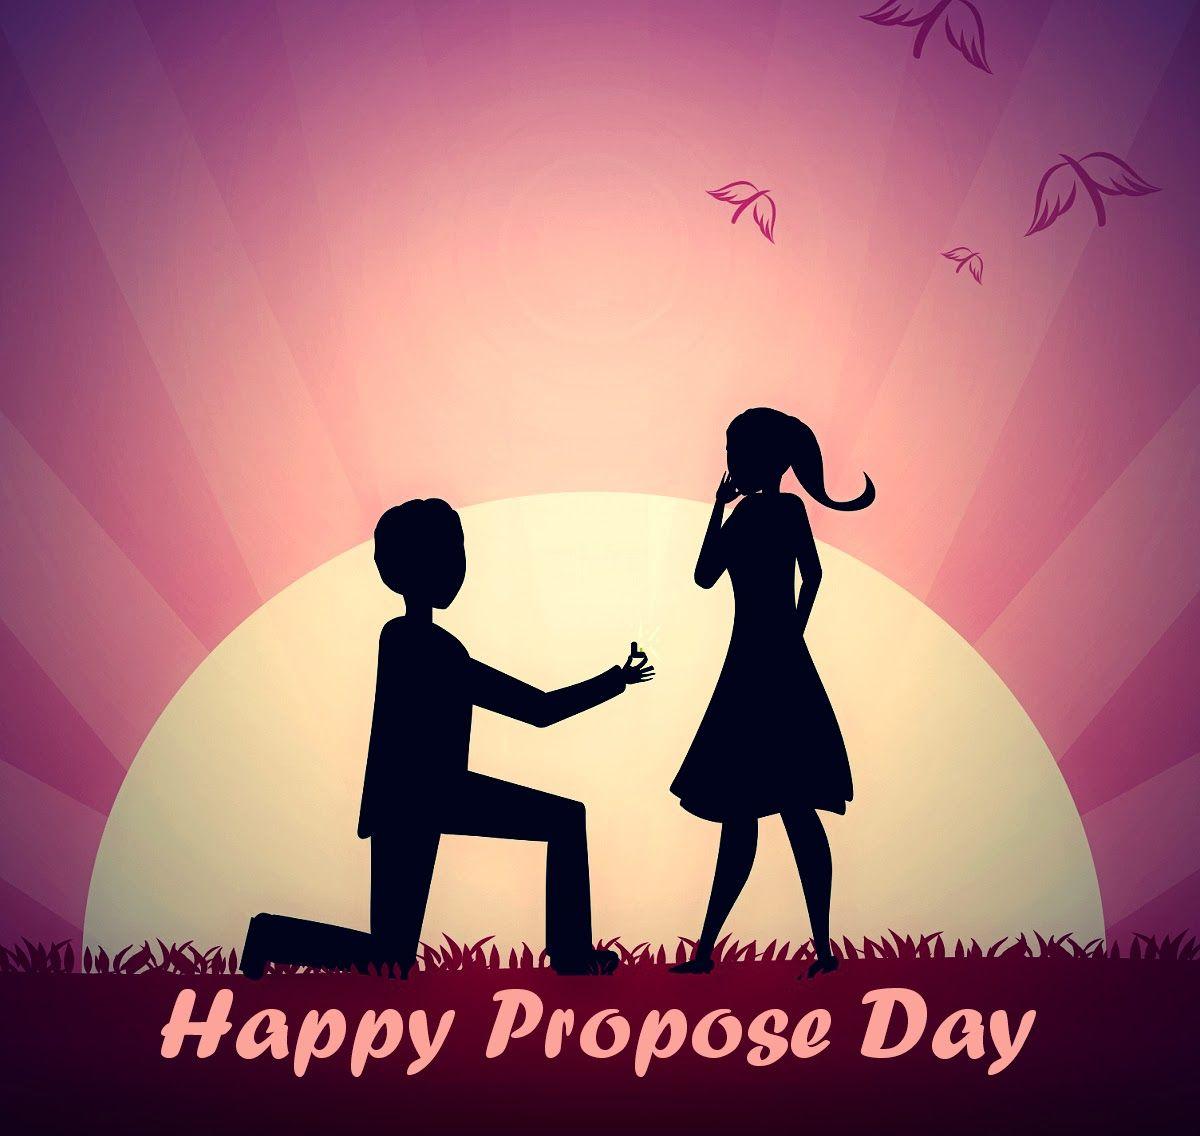 Happy Propose Day Image Status [Quotes] & SMS Pics